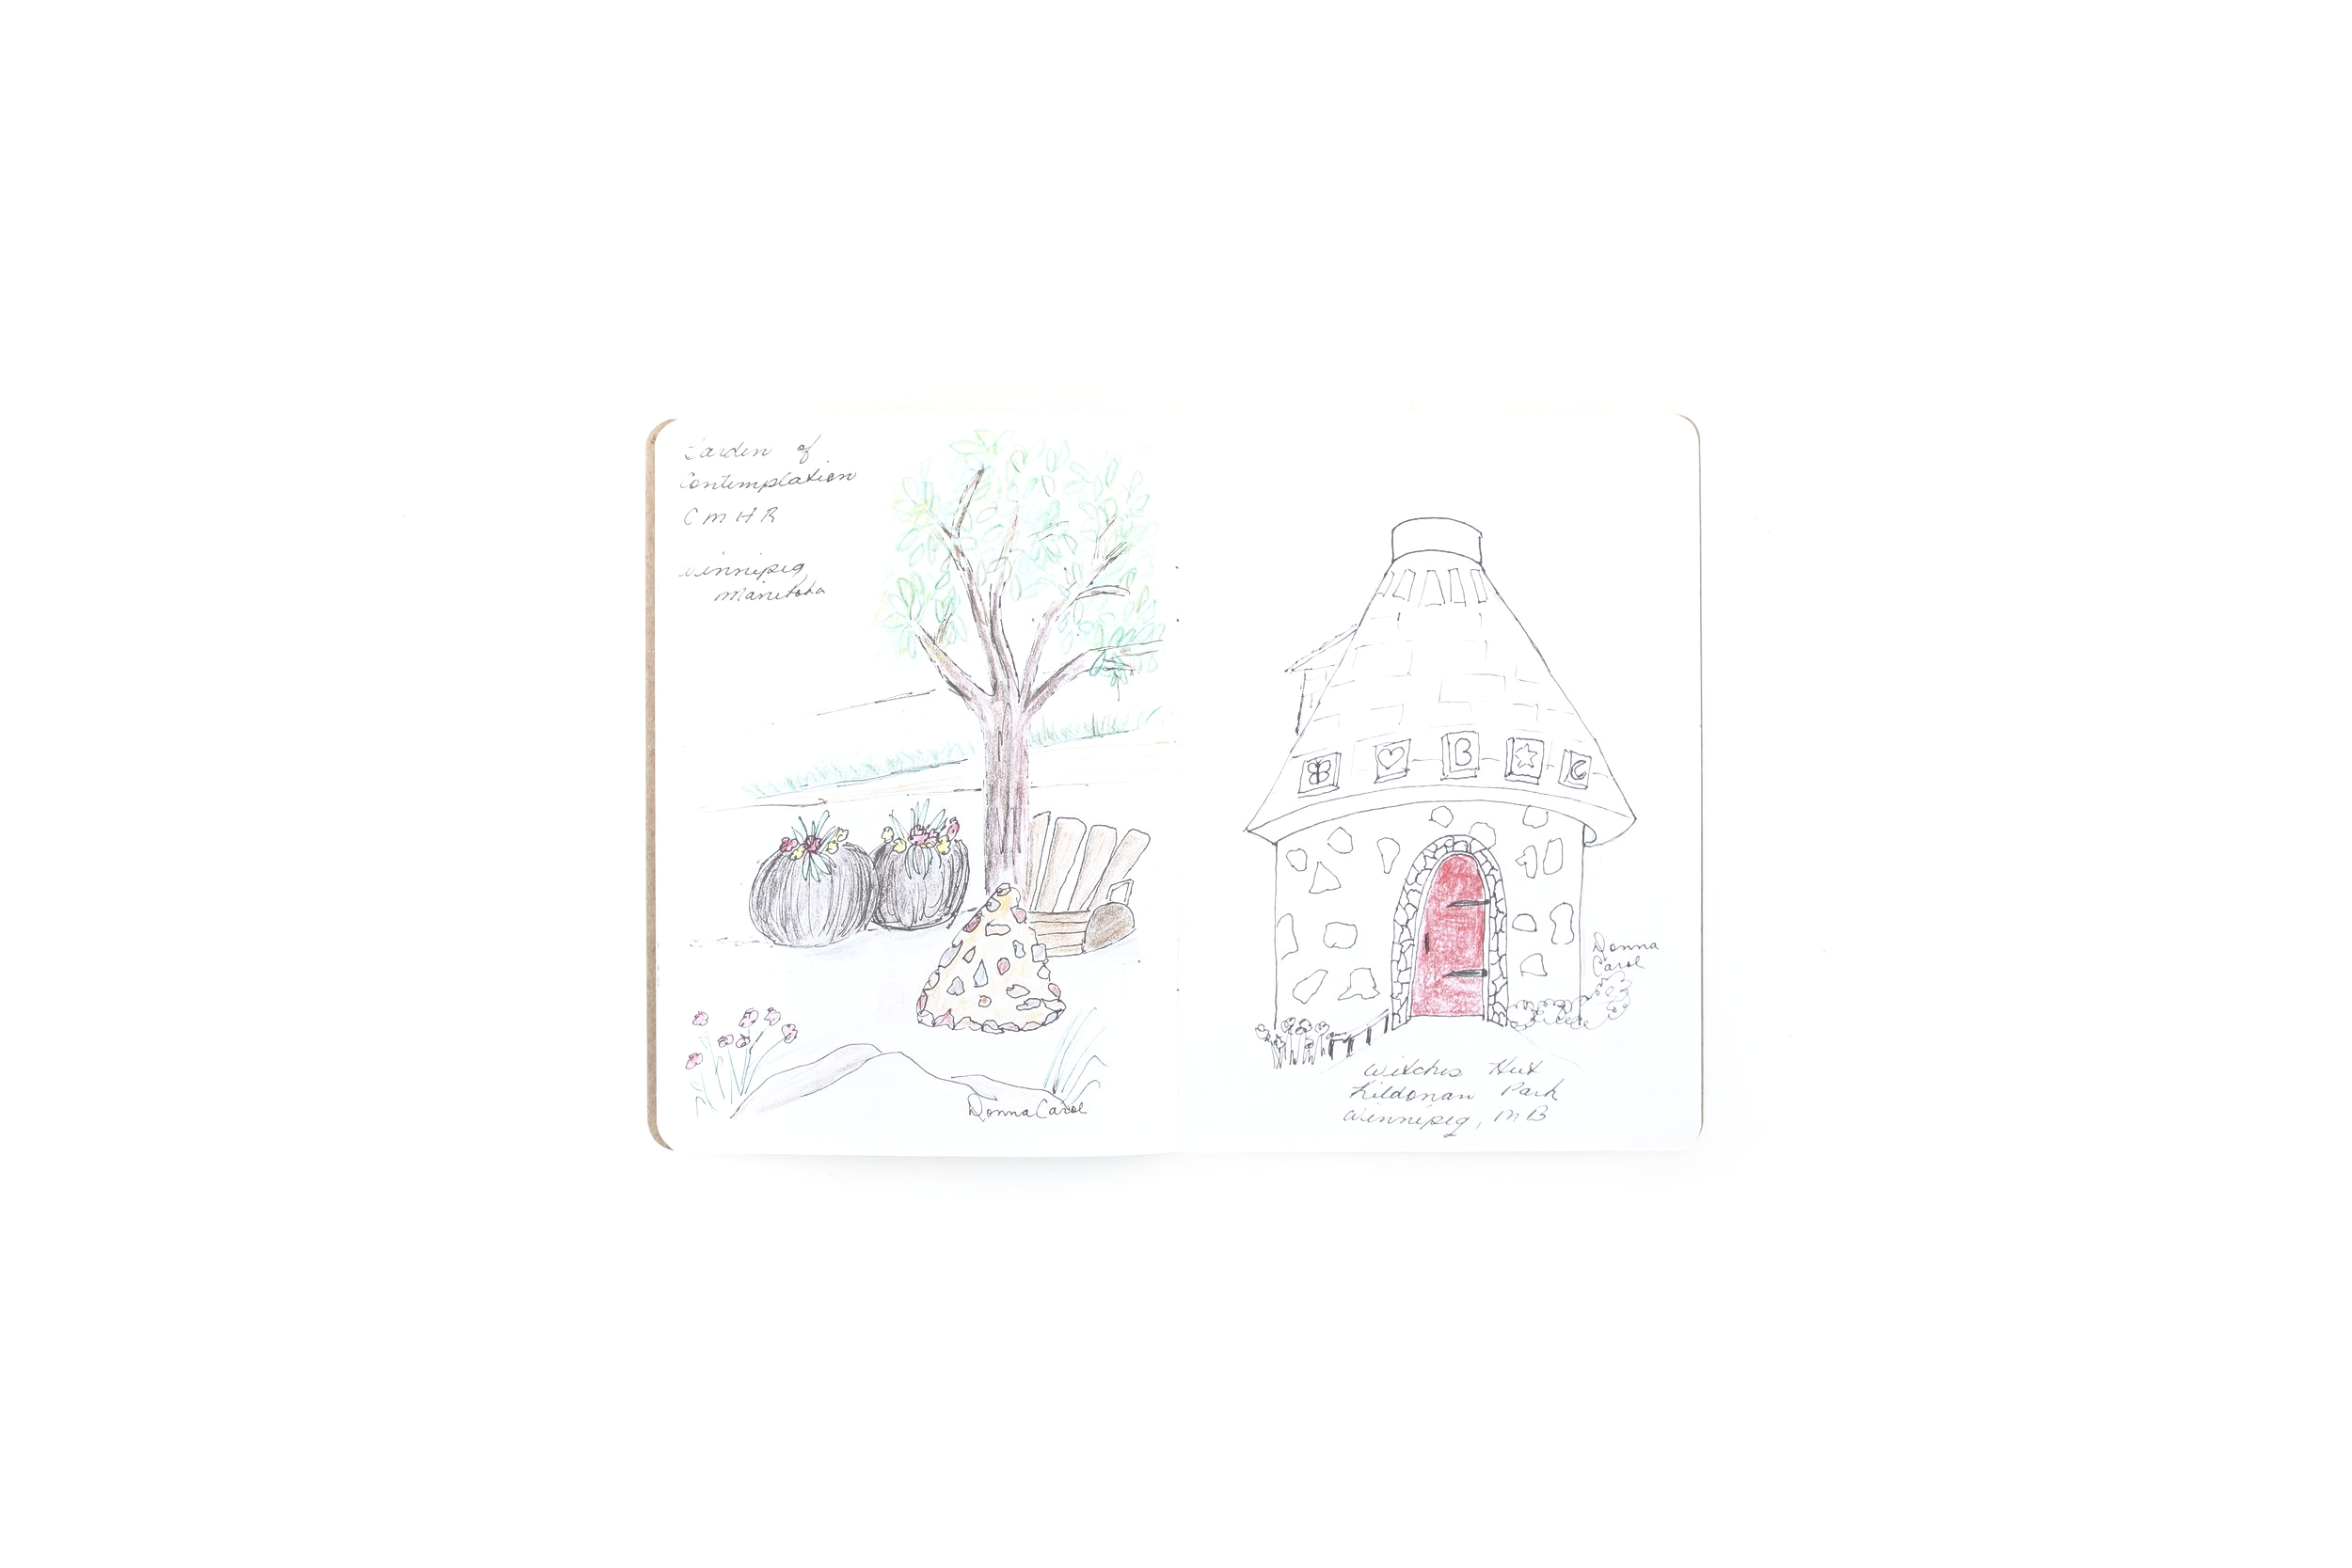 Tiny Sketchbook — Brooklyn Art Library / The Sketchbook Project